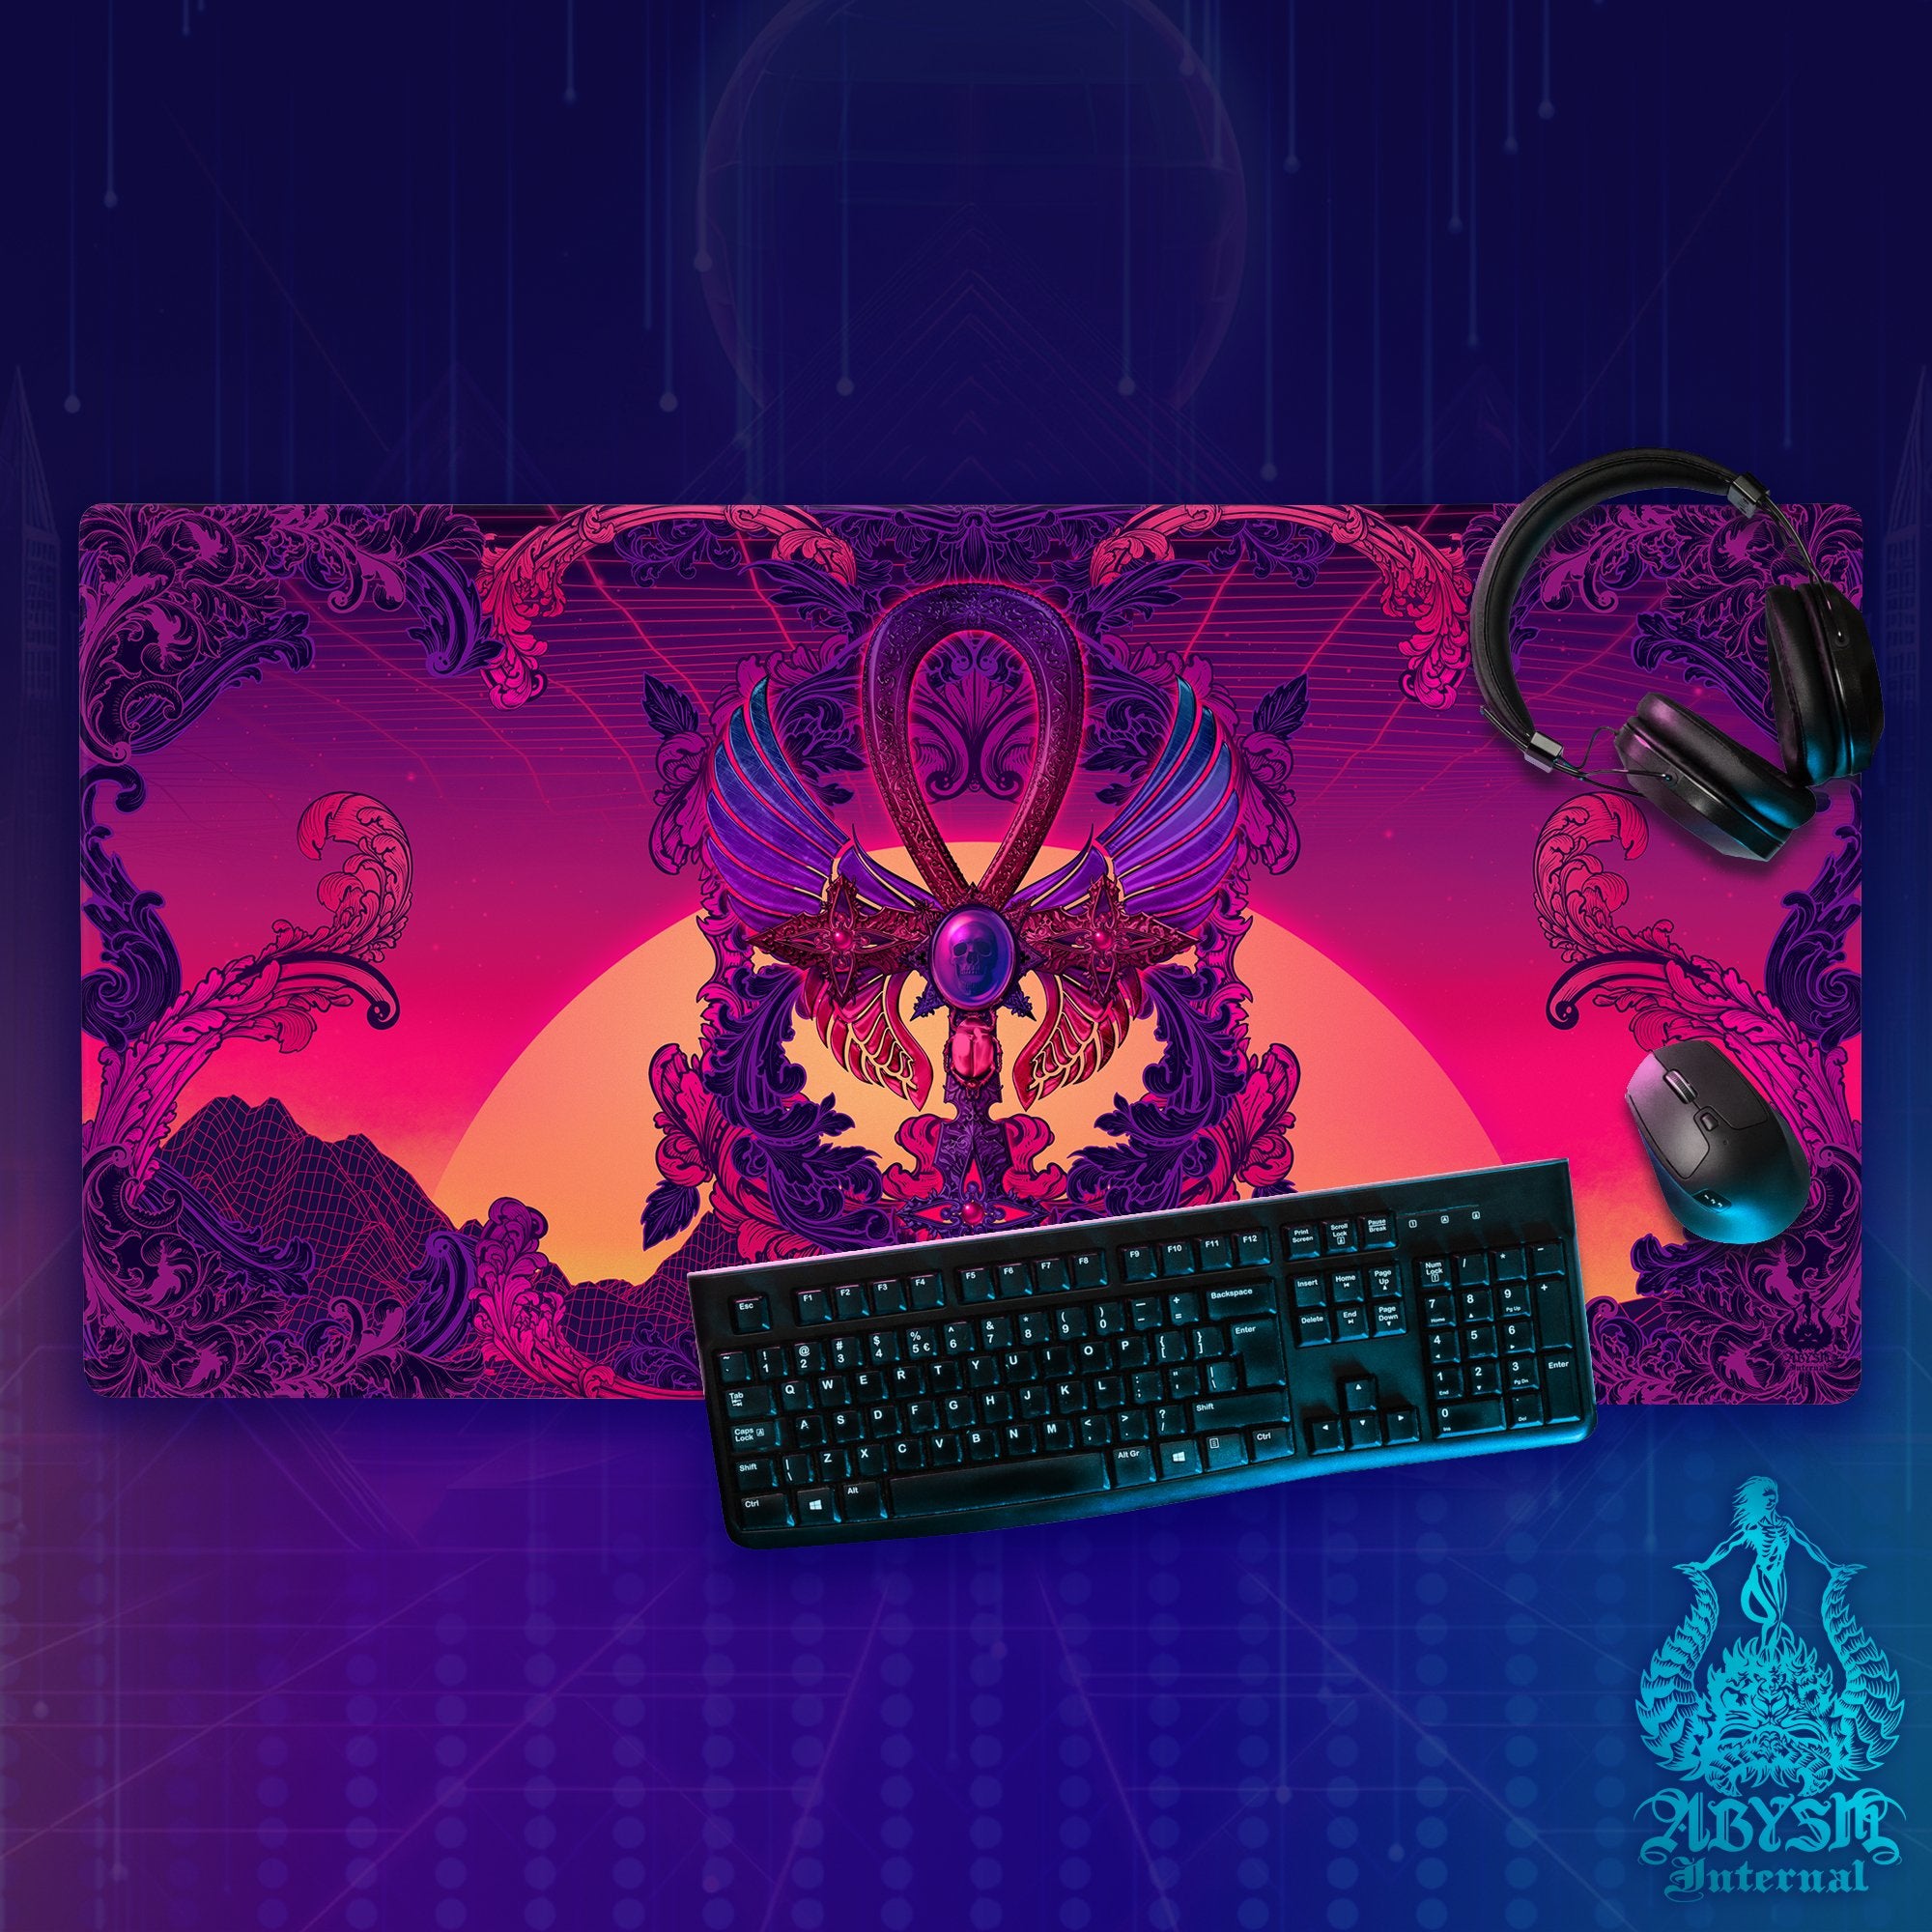 Vaporwave Workpad, Ankh Desk Mat, Cross Gaming Mouse Pad, Psychedelic Table Protector Cover, Trippy Art Print - Abysm Internal